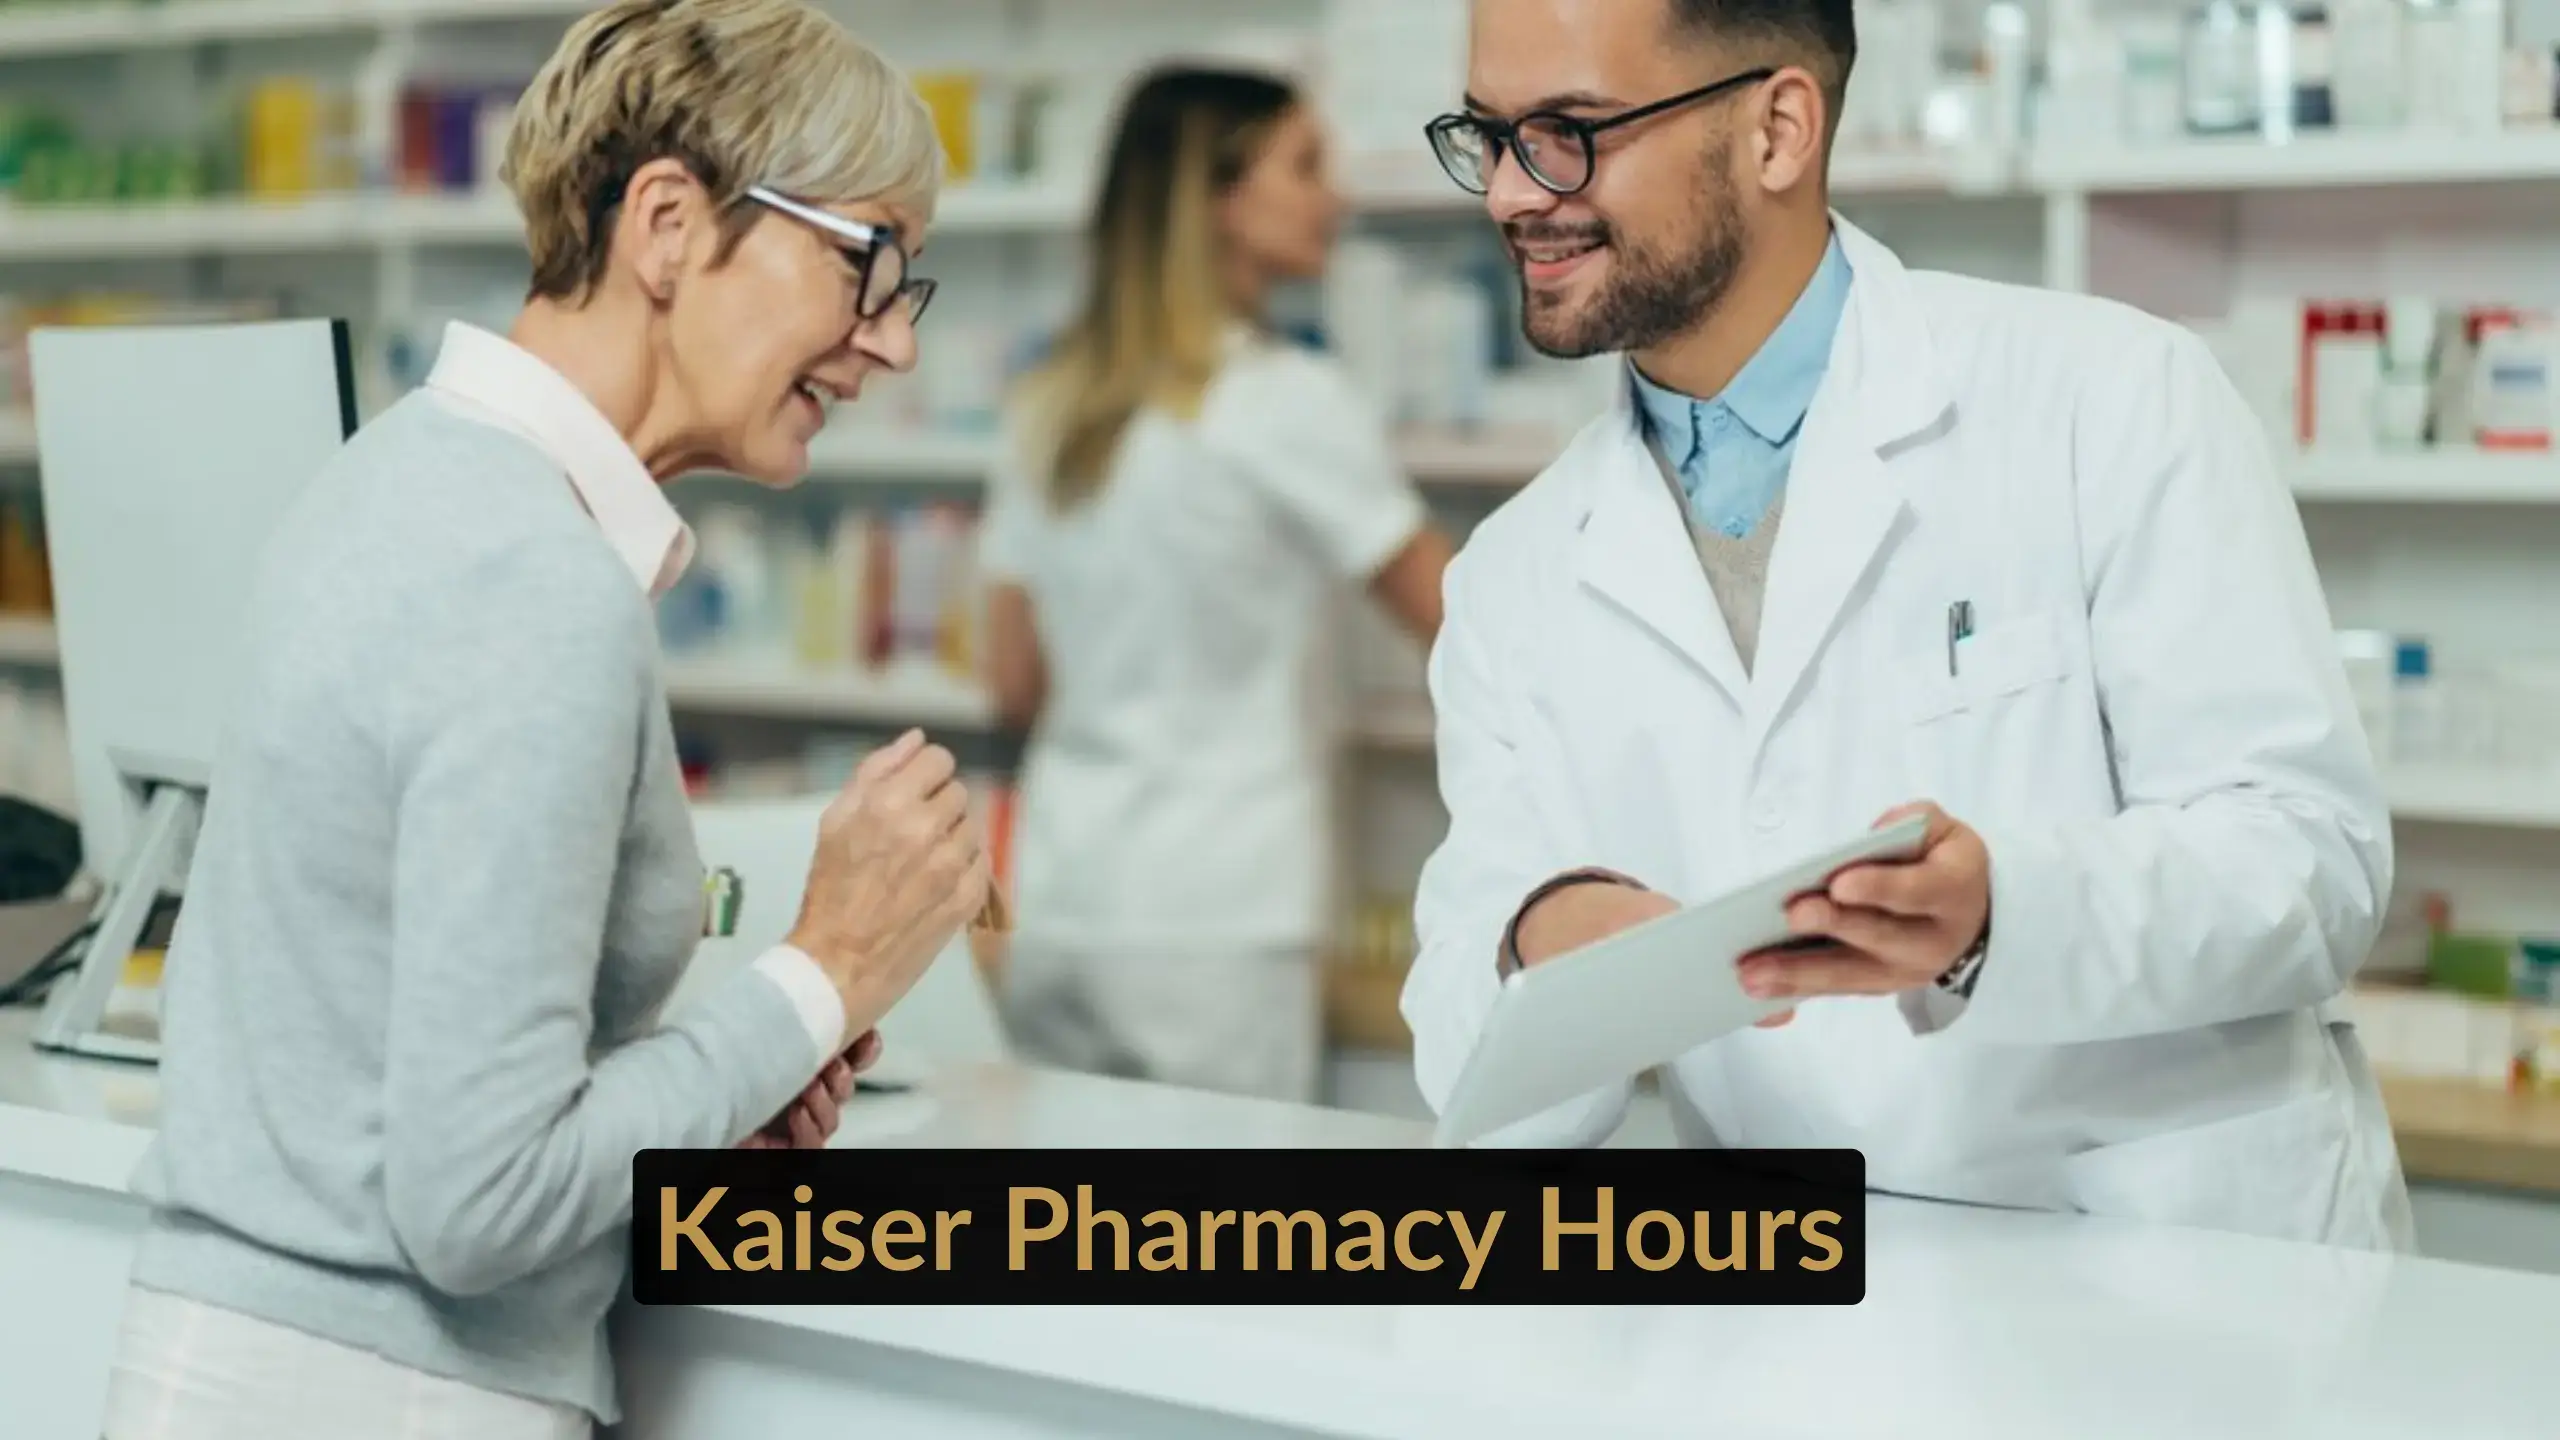 Easily find Kaiser pharmacy hours and near me locations for your convenience. Get your medications and more with ease. Plan your visit today!